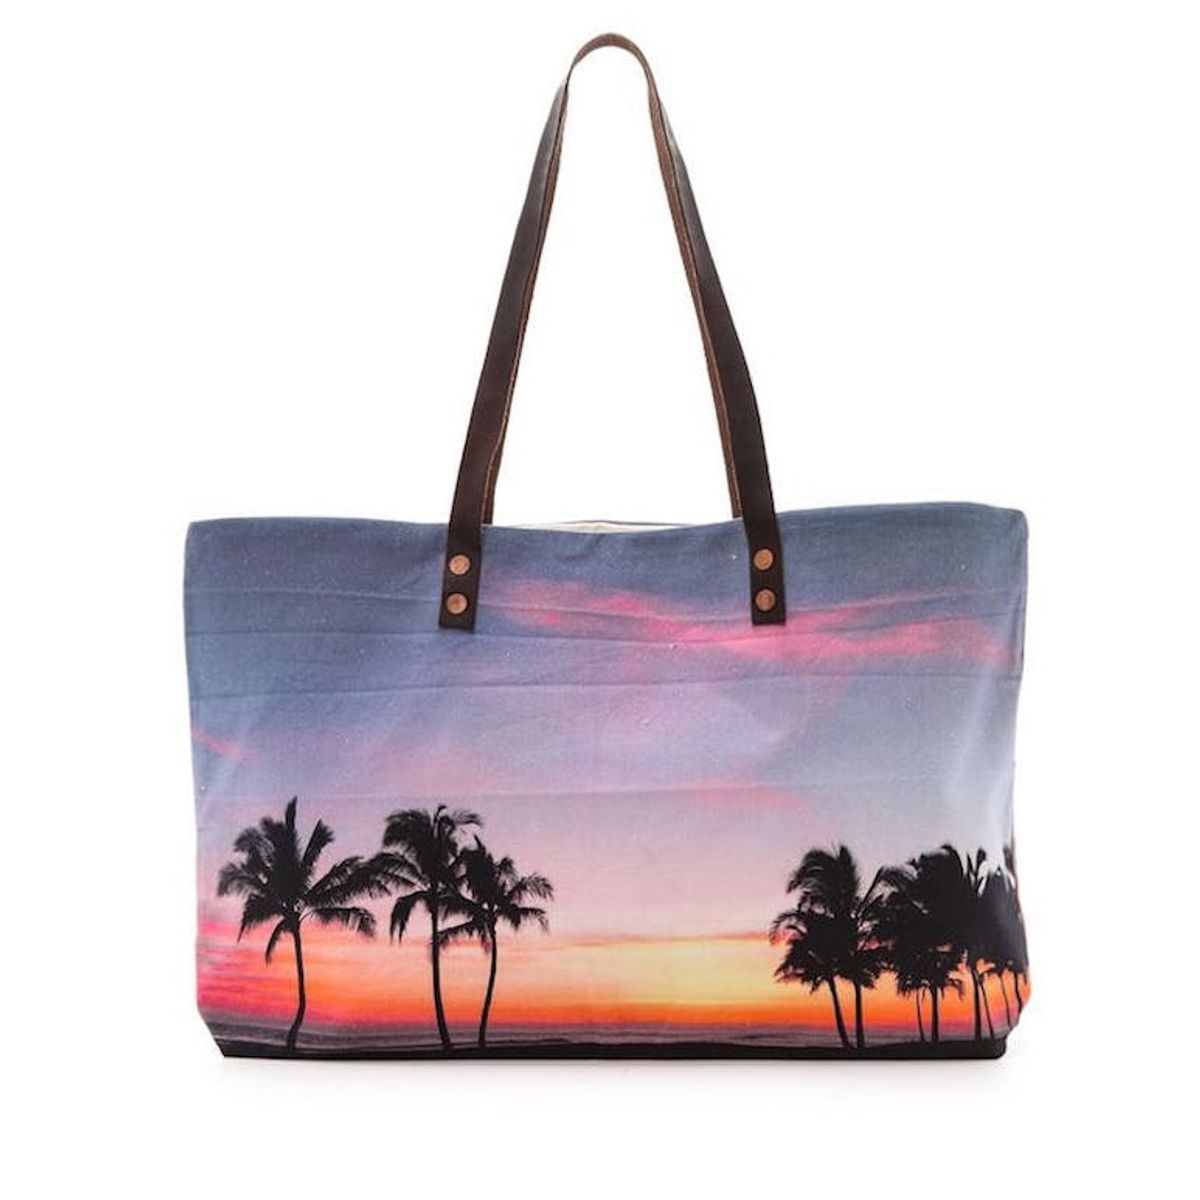 17 Beautiful Beach Bags for Under $100